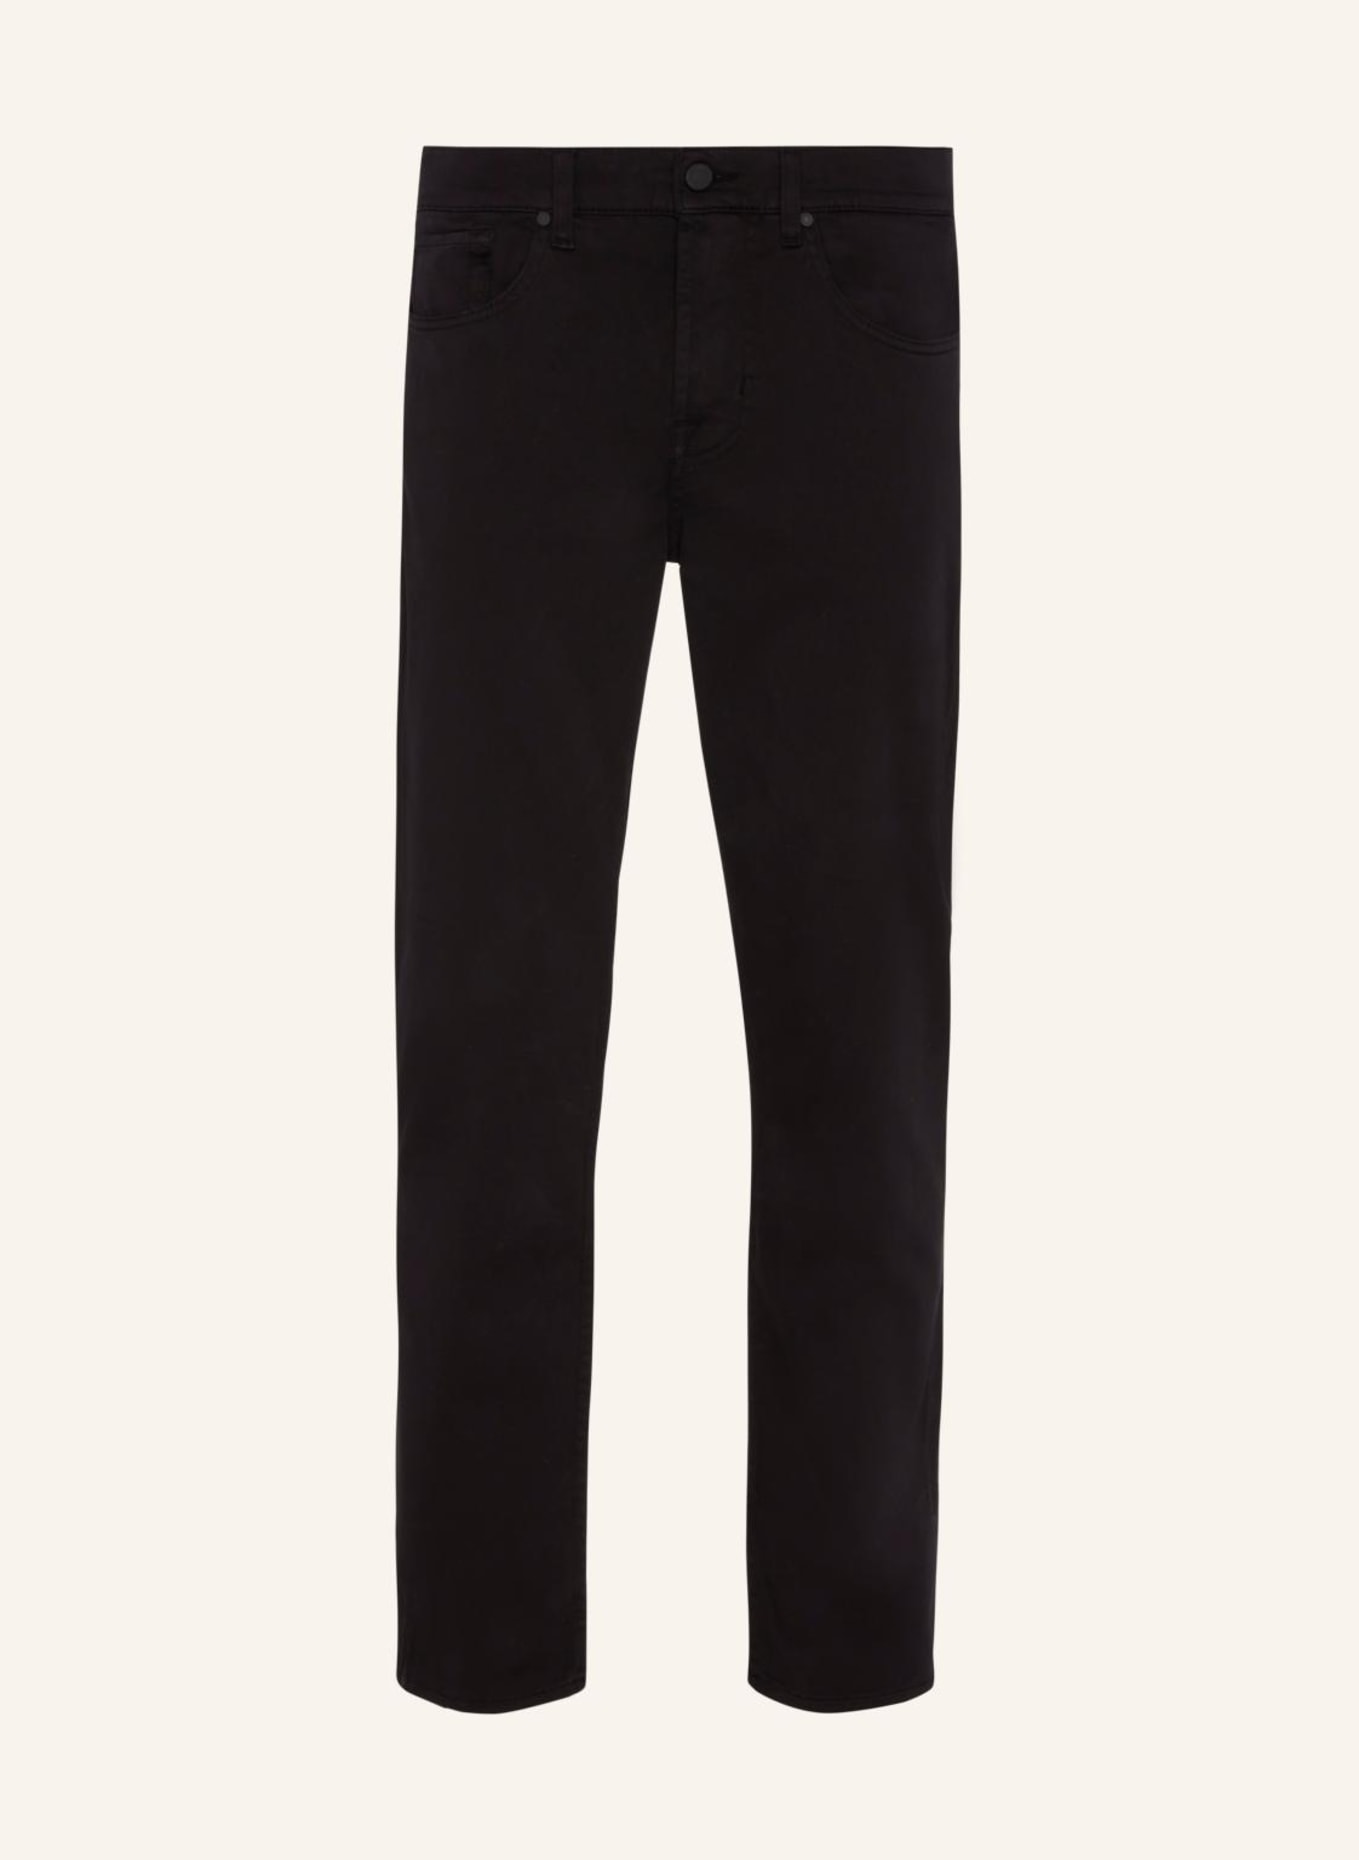 7 for all mankind Pant SLIMMY TAPERED Slim fit, Farbe: SCHWARZ (Bild 1)